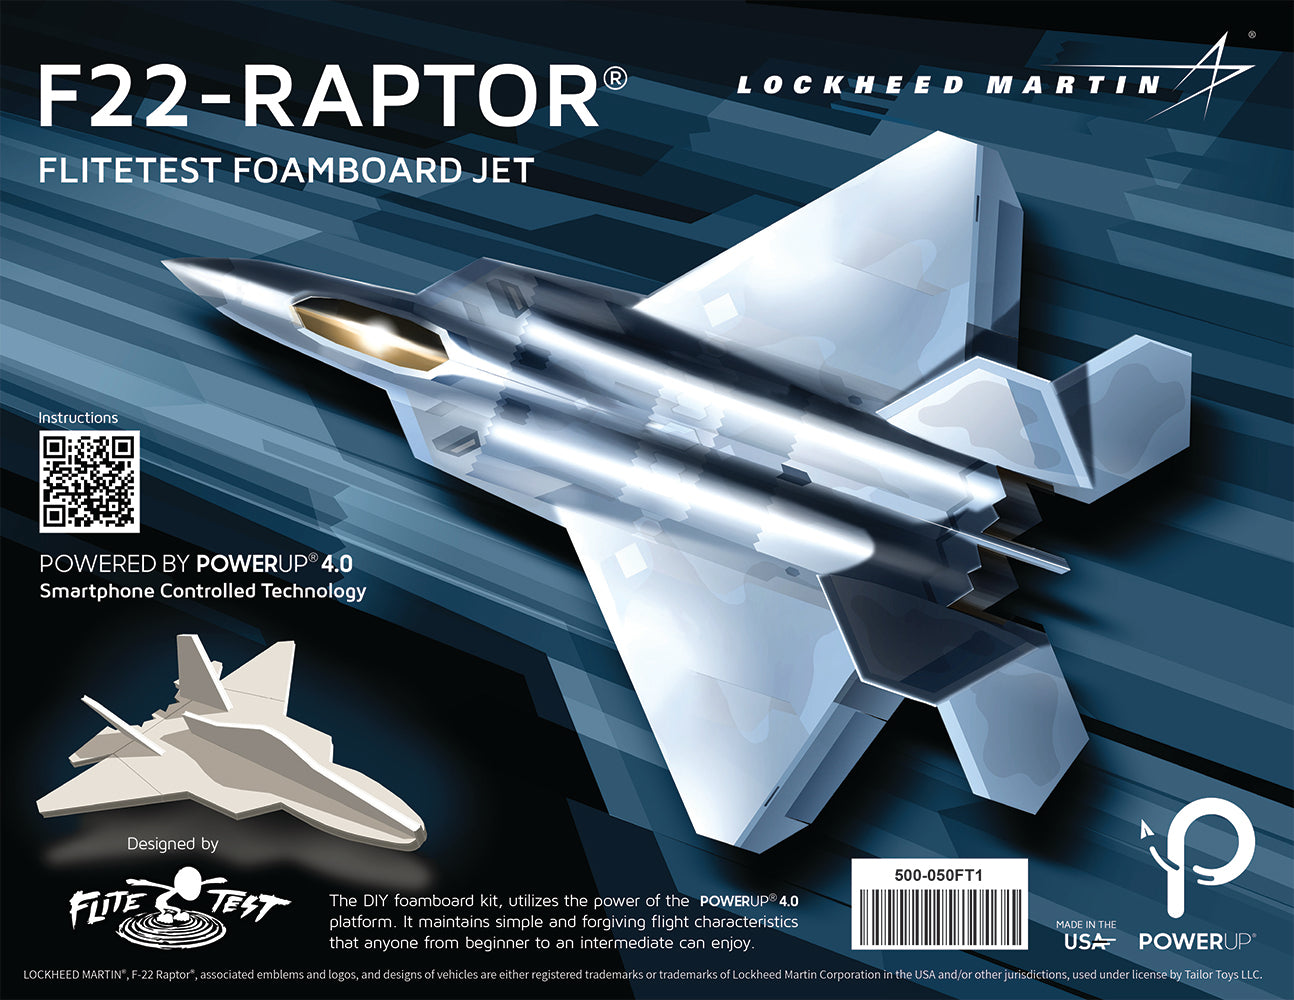 Introducing the PowerUp F22 Raptor® RC Airplane